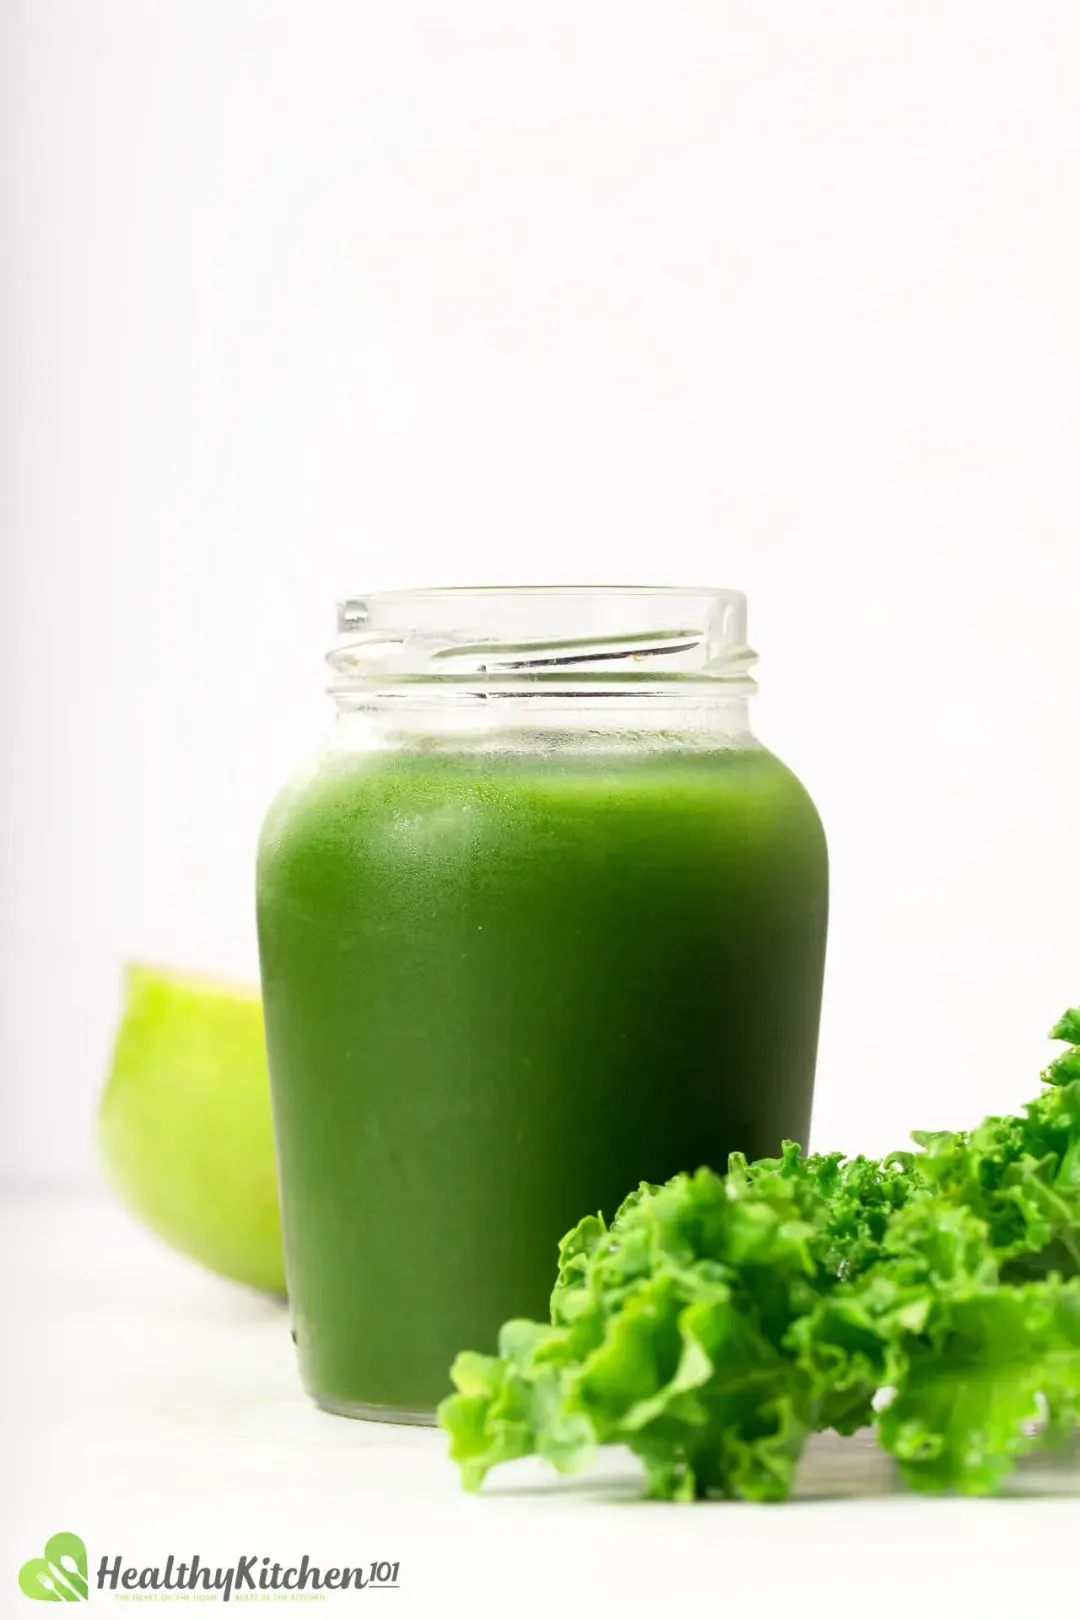 A cool jar holding green vegetable juice with a kale leaf on the side